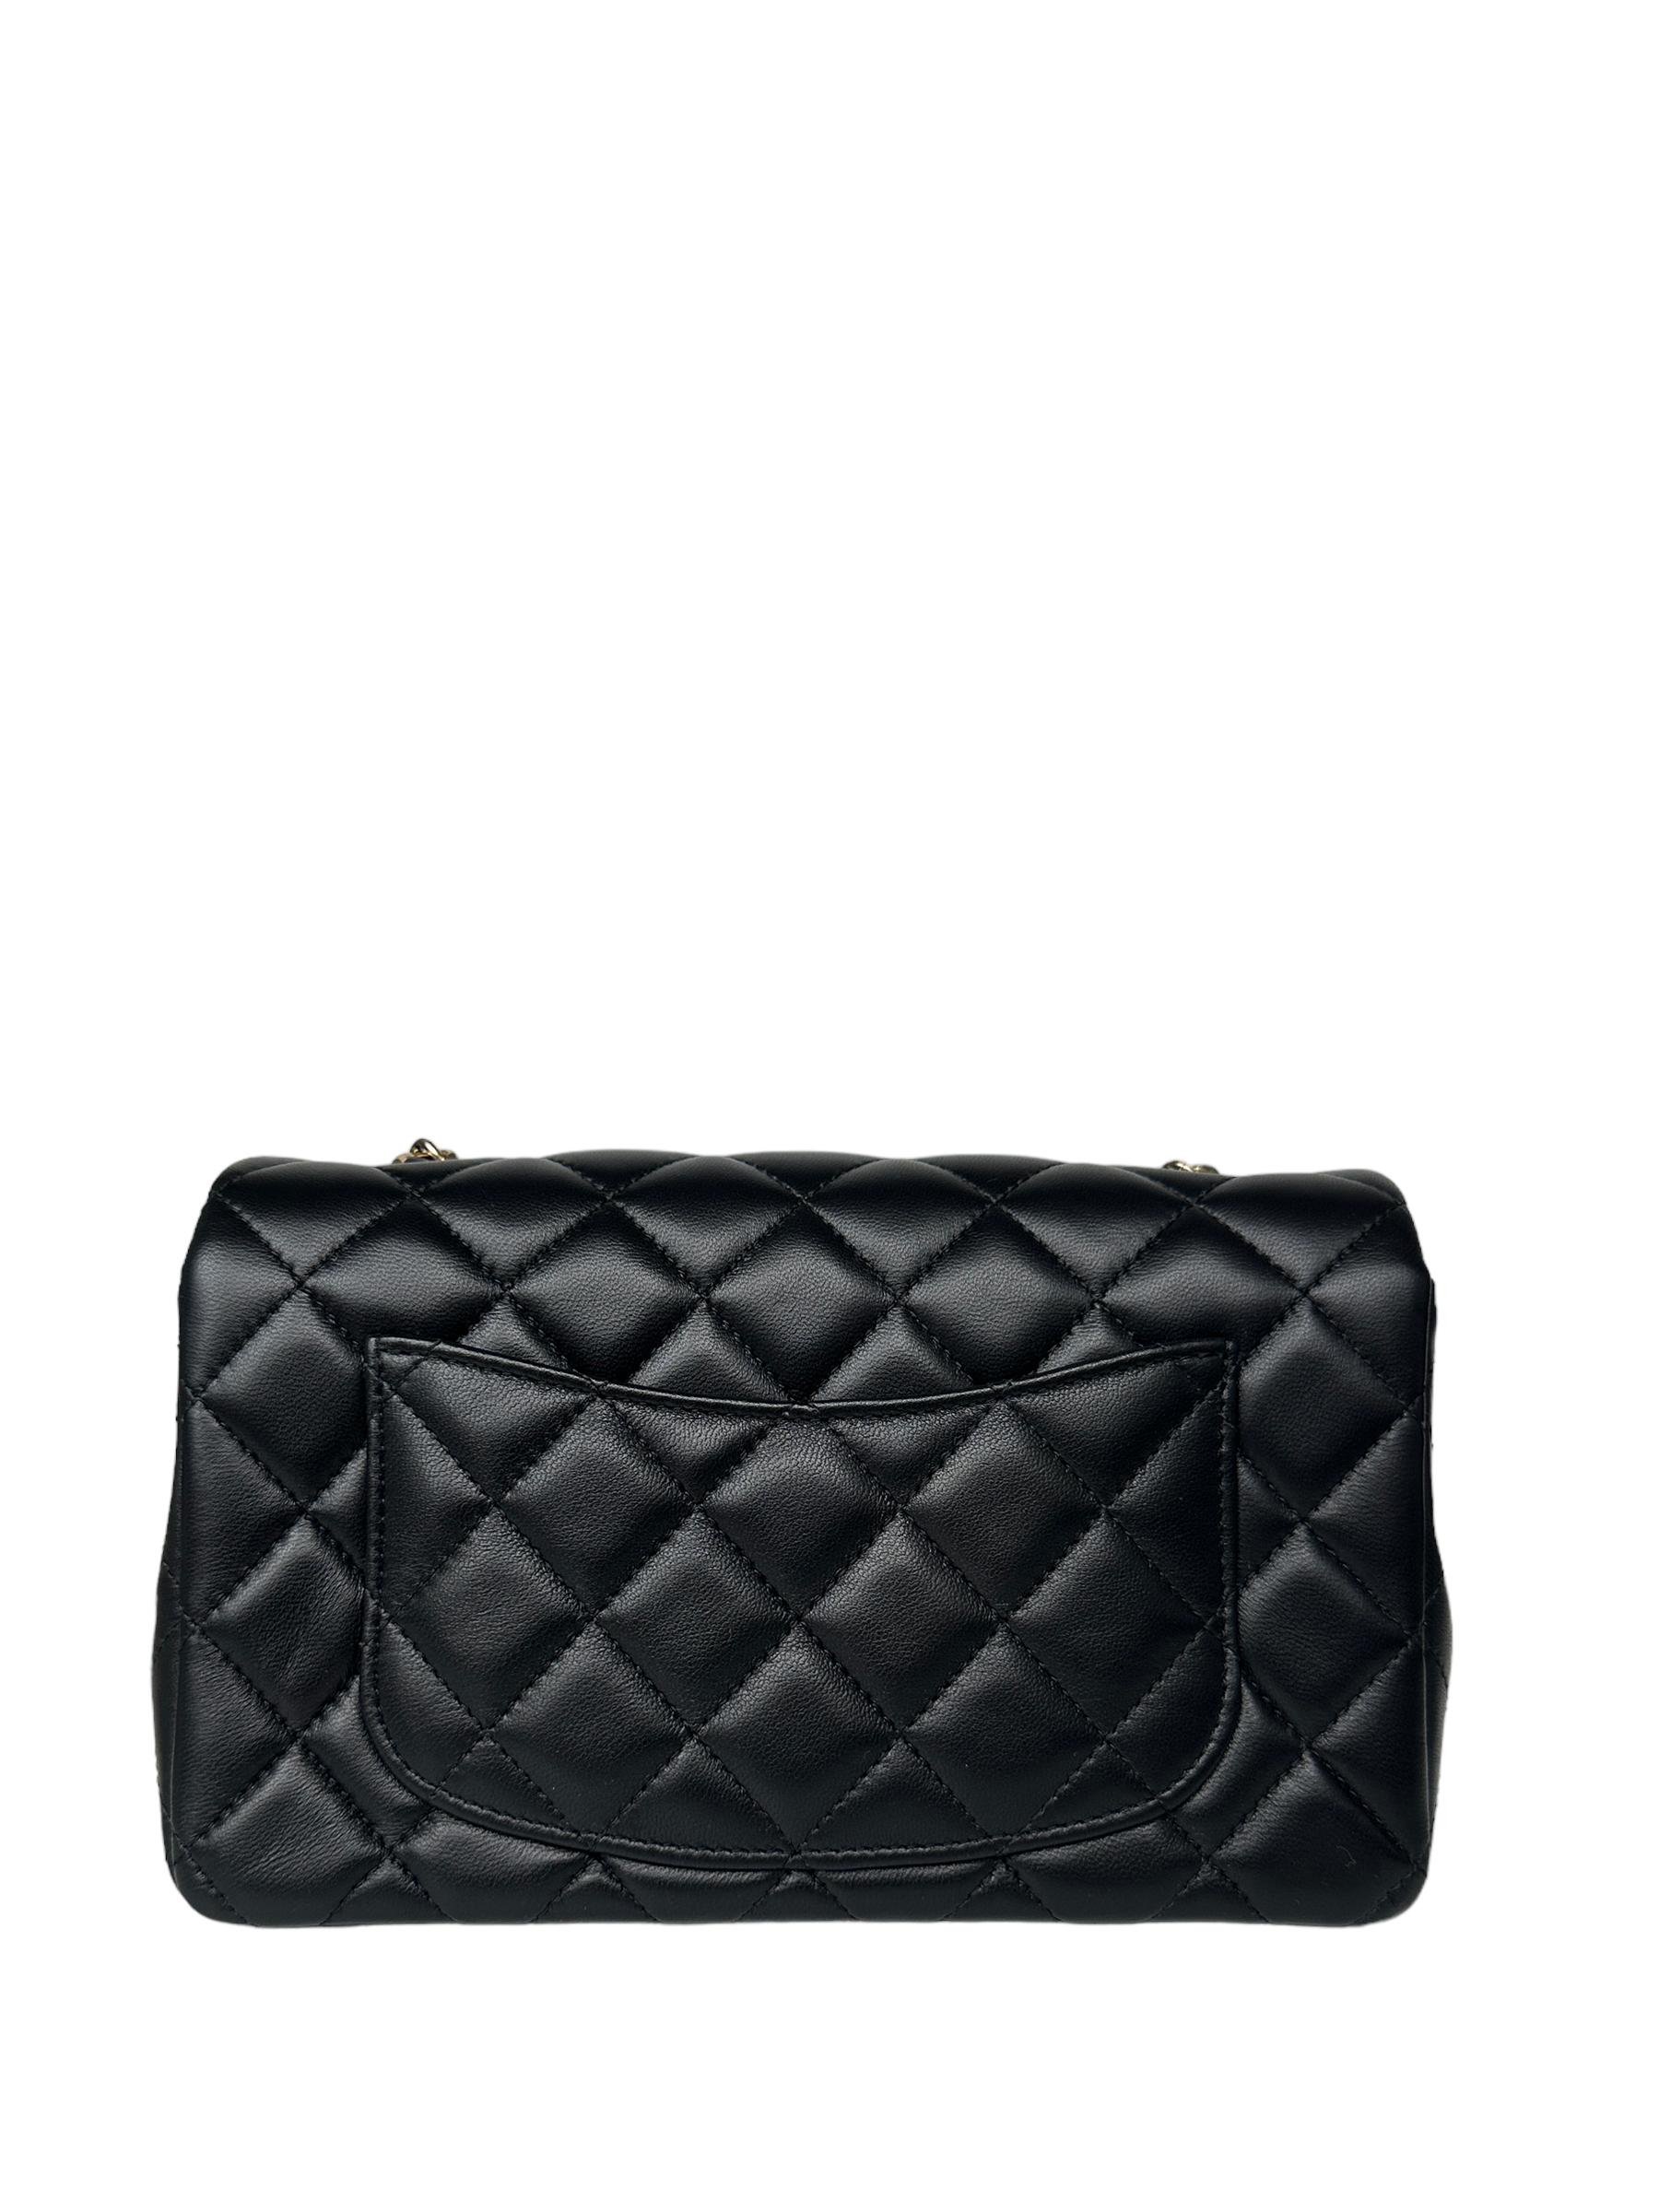 Chanel Black Lambskin Quilted Rectangular Mini Flap Bag In Excellent Condition In New York, NY